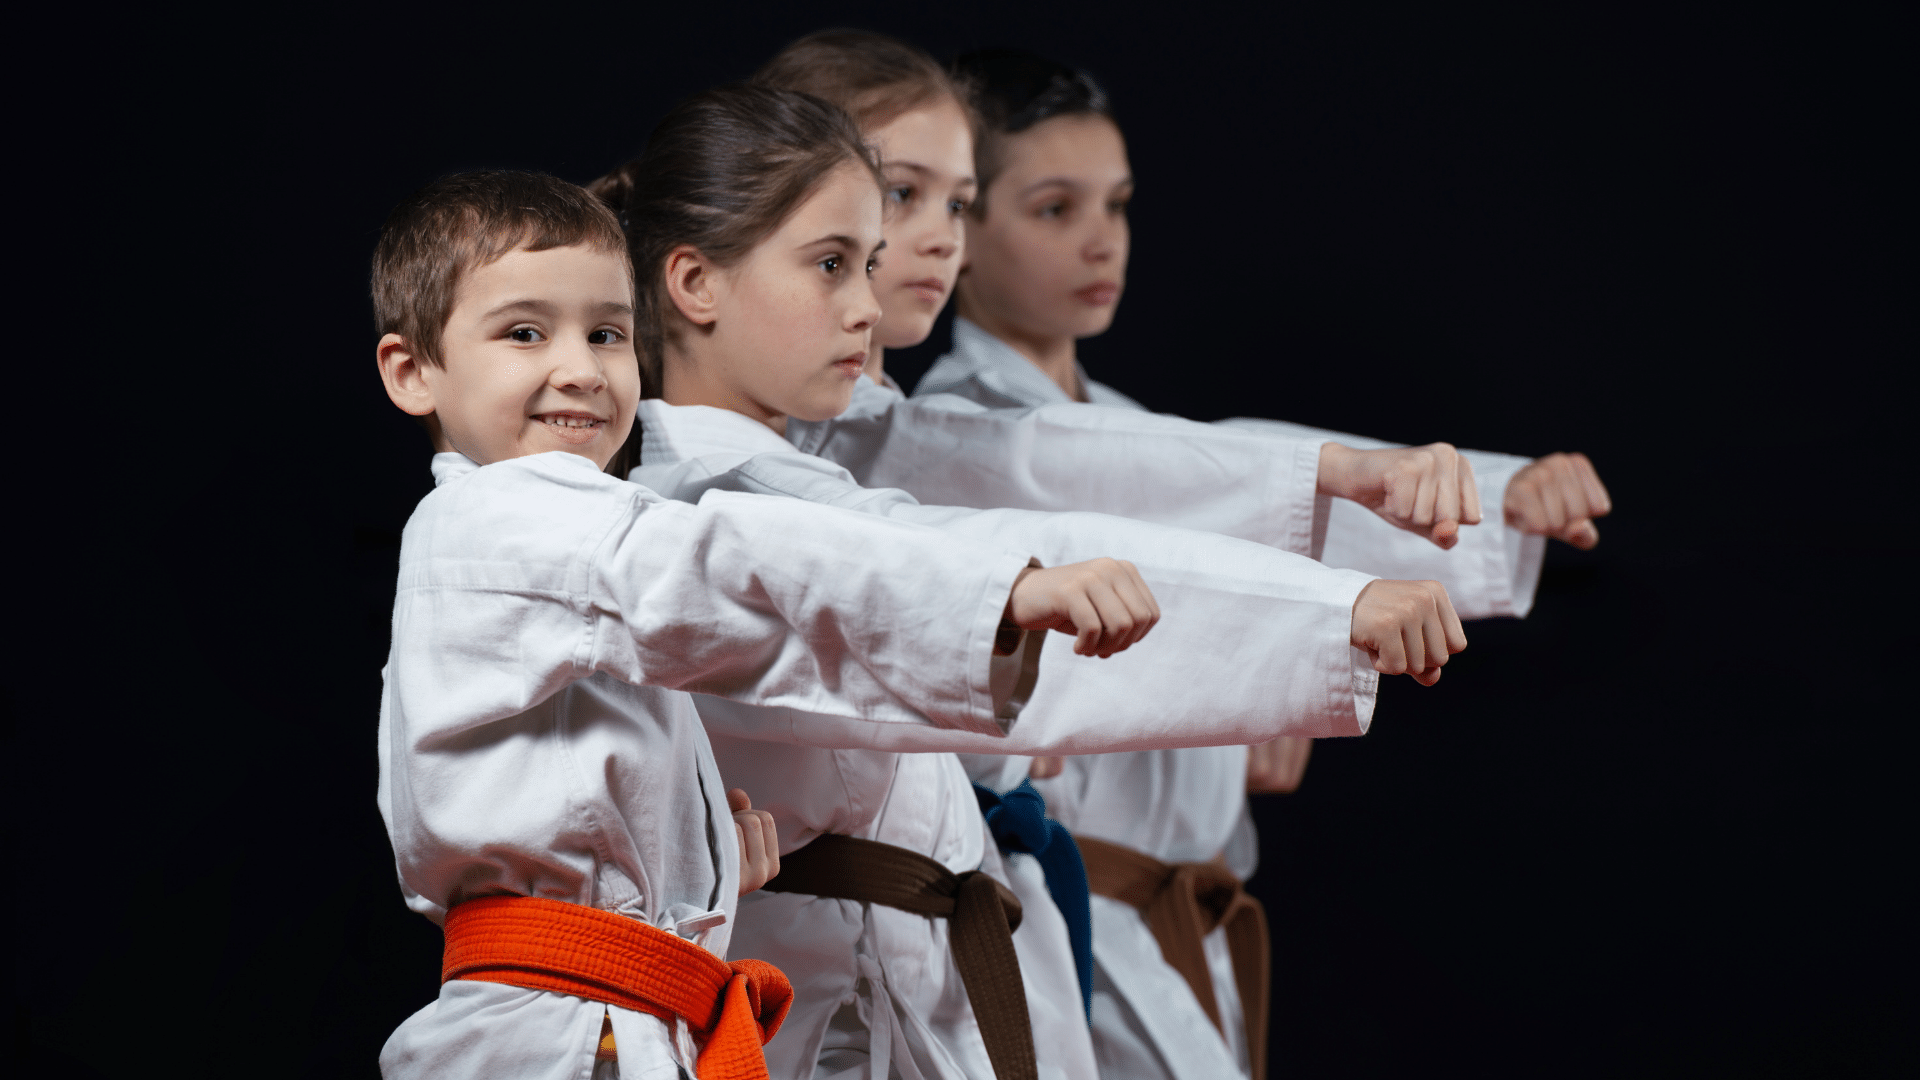 how much do karate classes cost for kids